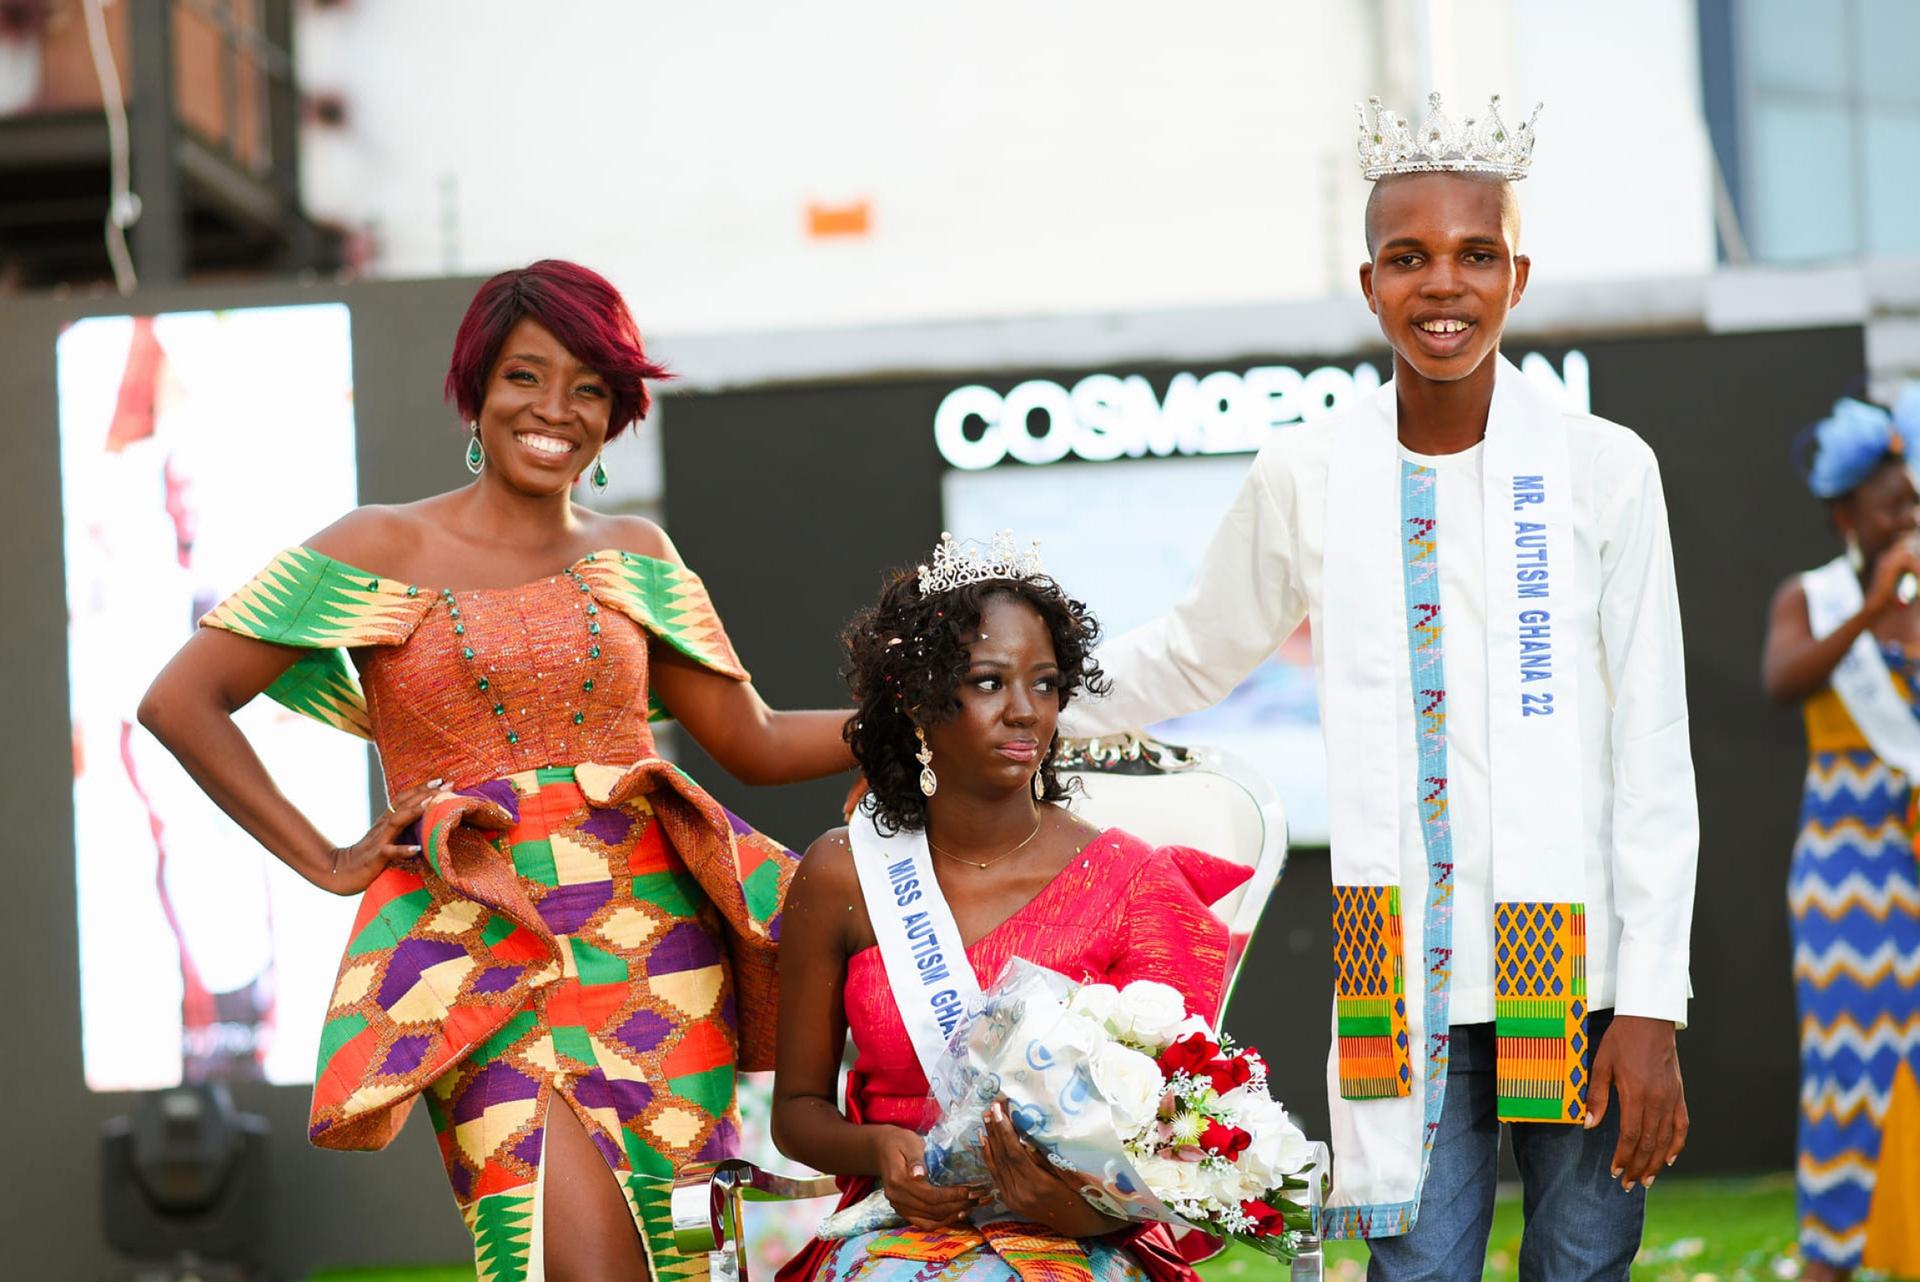 Afi Antonio (left) stands next to the winners of the 2022 Mr. and Miss Autism Ghana Pageant.